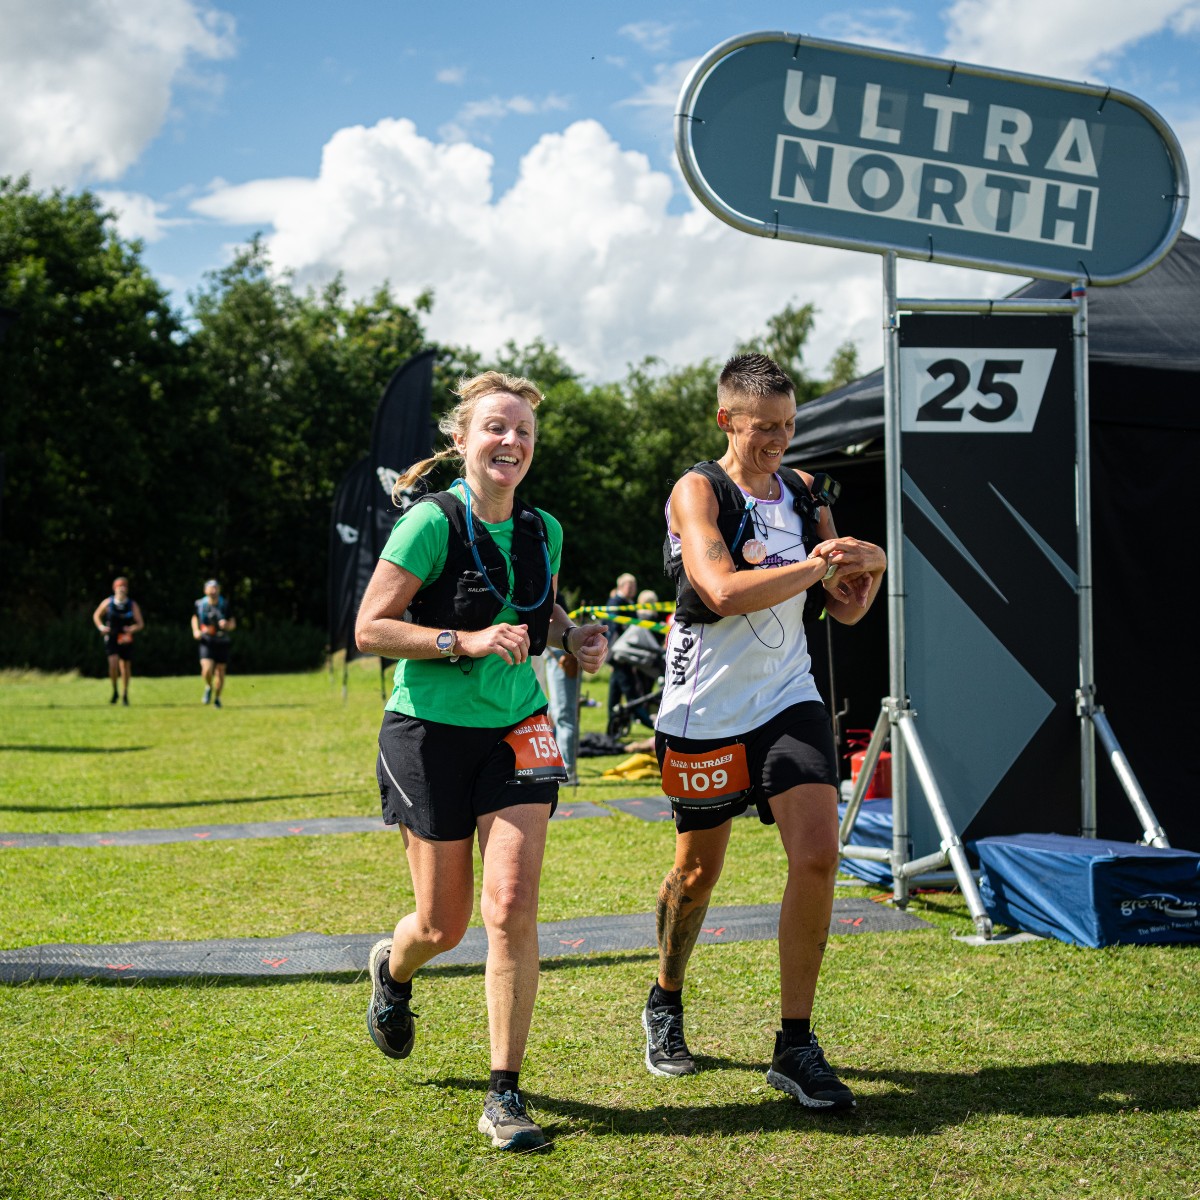 Less than 3 months to go until Ultra North! 🤩